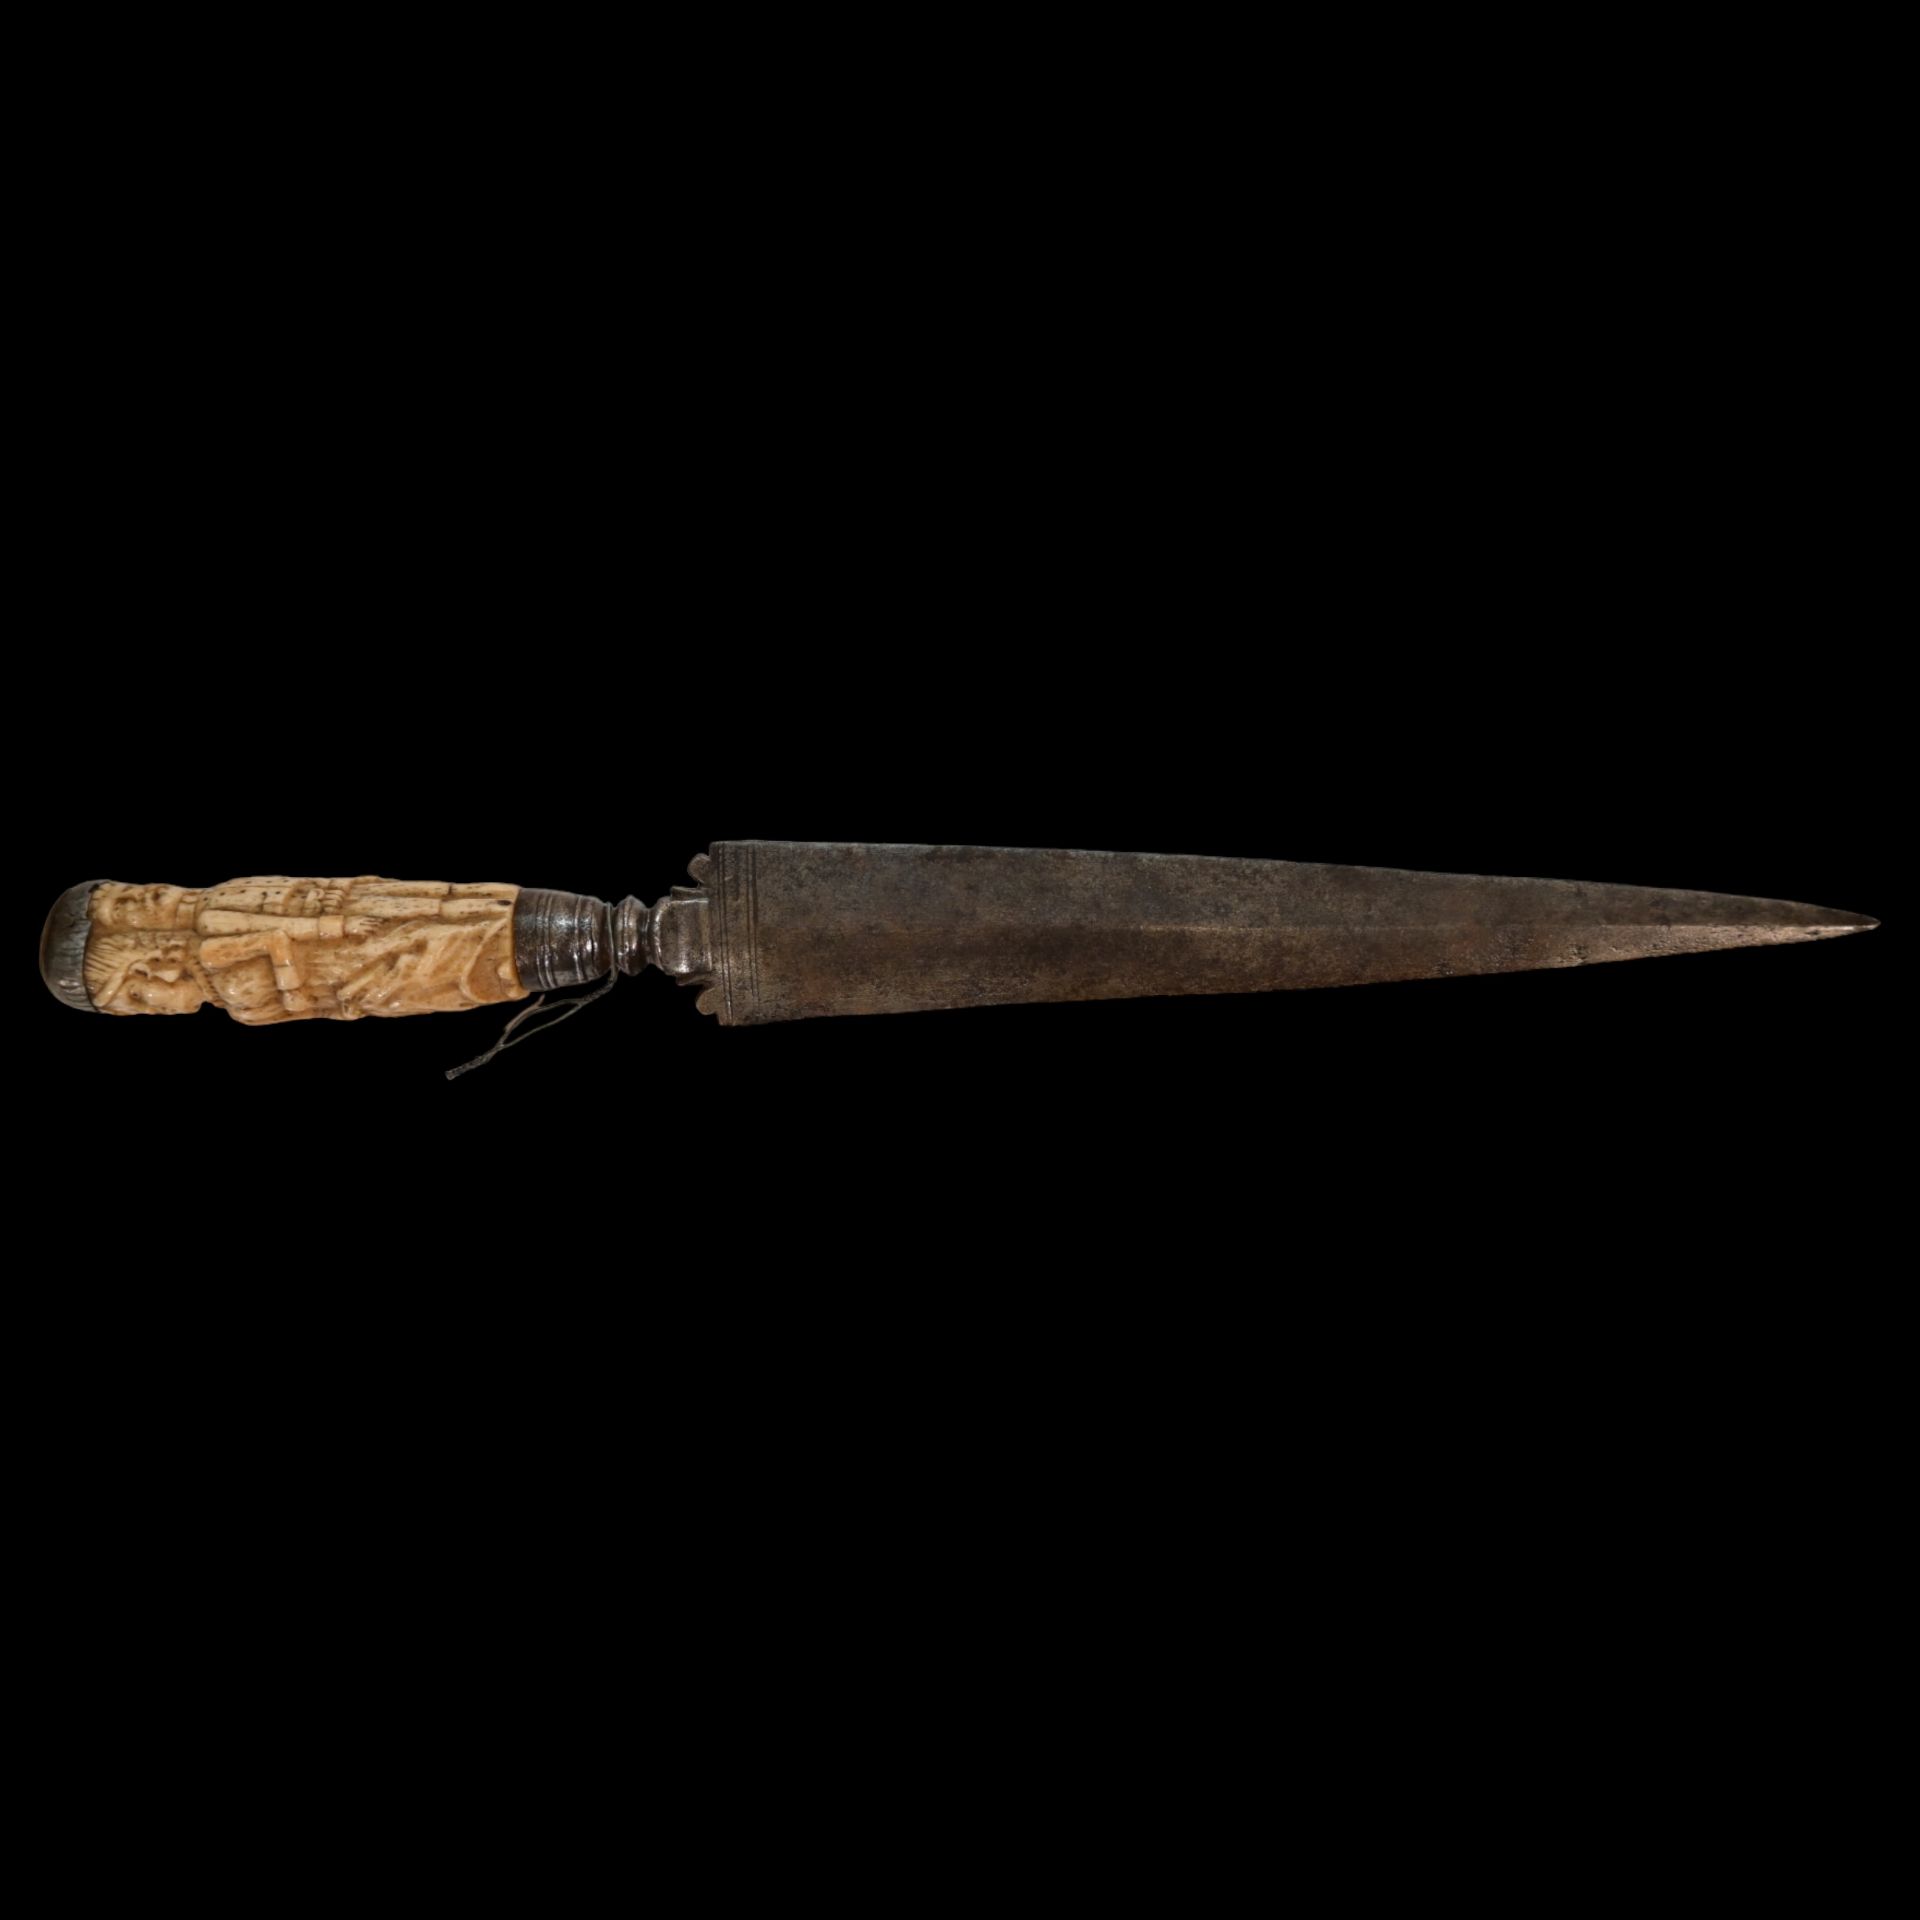 An Italian hunting dagger, 18th century, carved bone handle. - Image 3 of 11